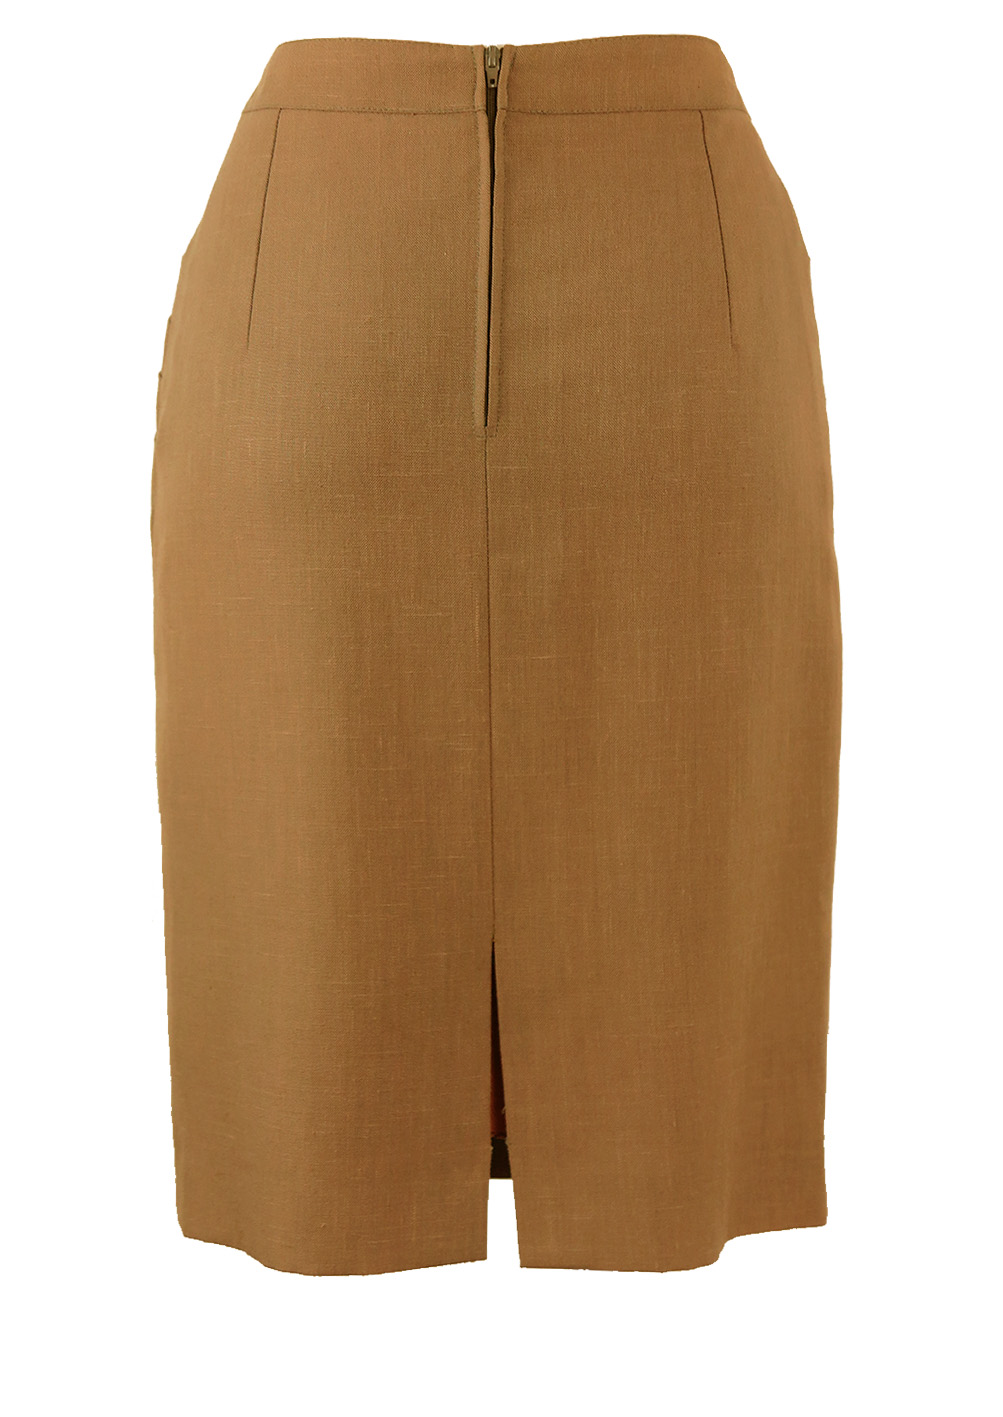 Taupe Knee Length Pencil Skirt with Decorative Waistband - S | Reign ...